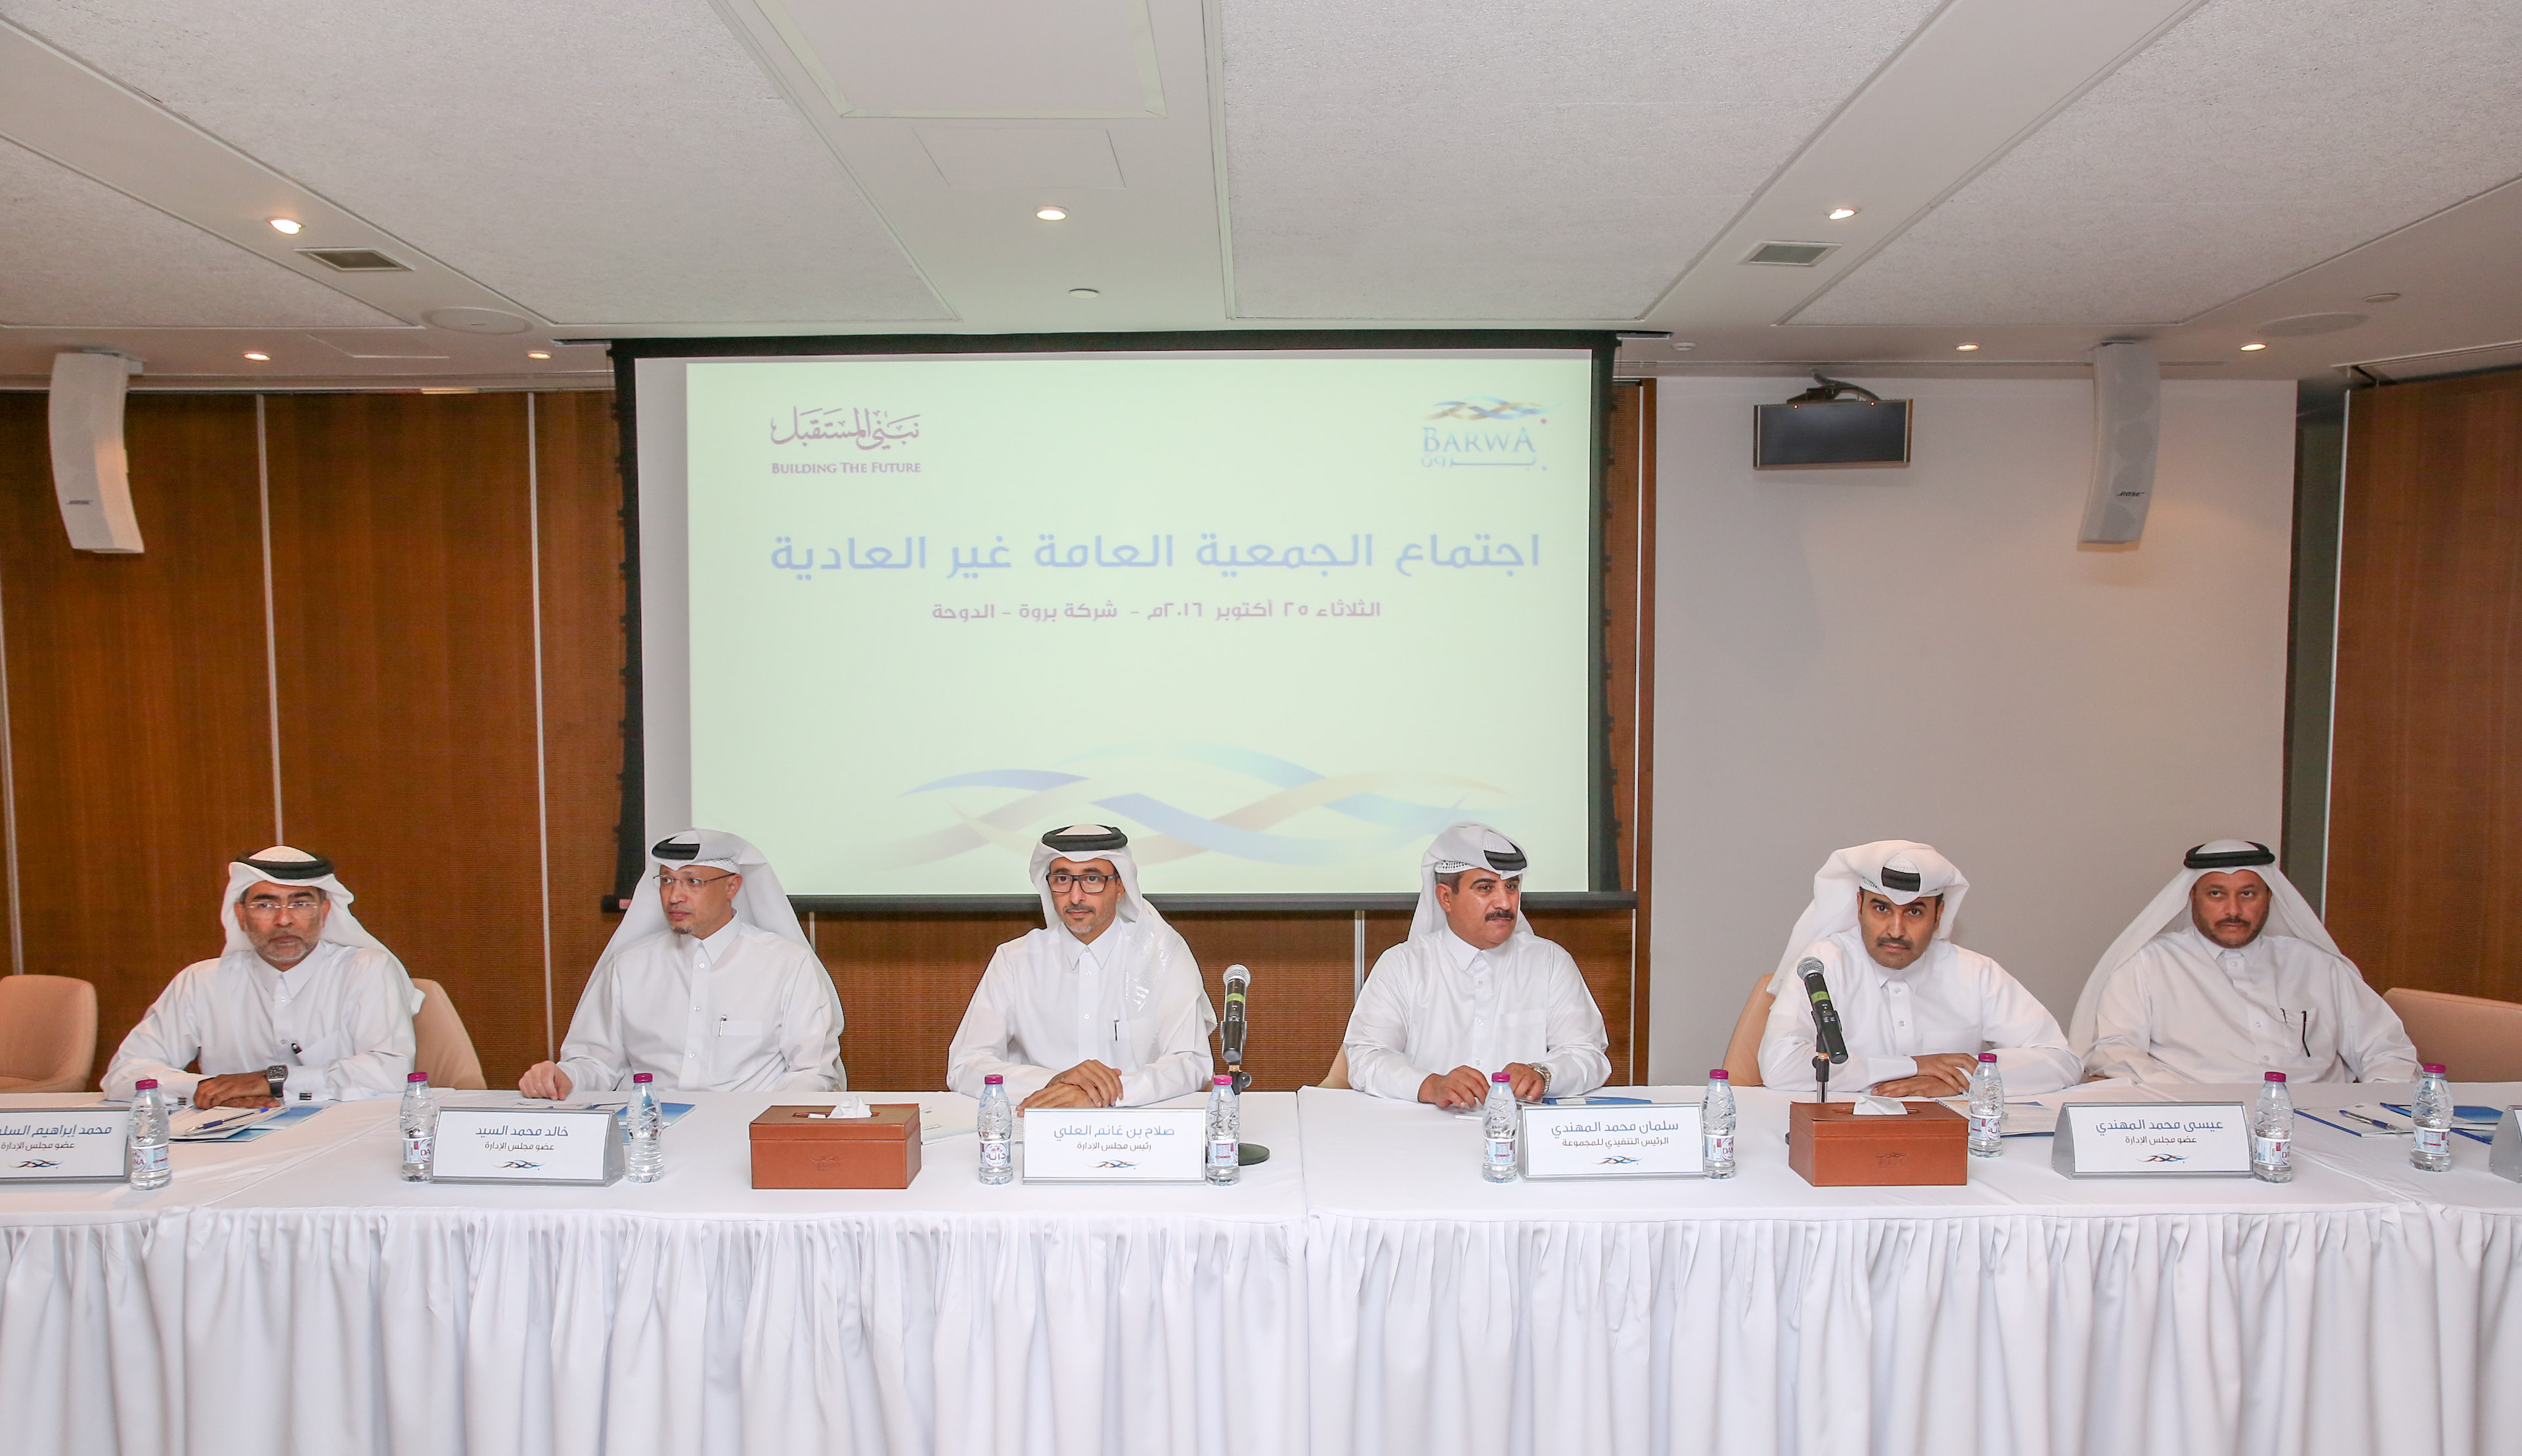 Barwa EGM approves amendment of the Articles of Association of the  Company